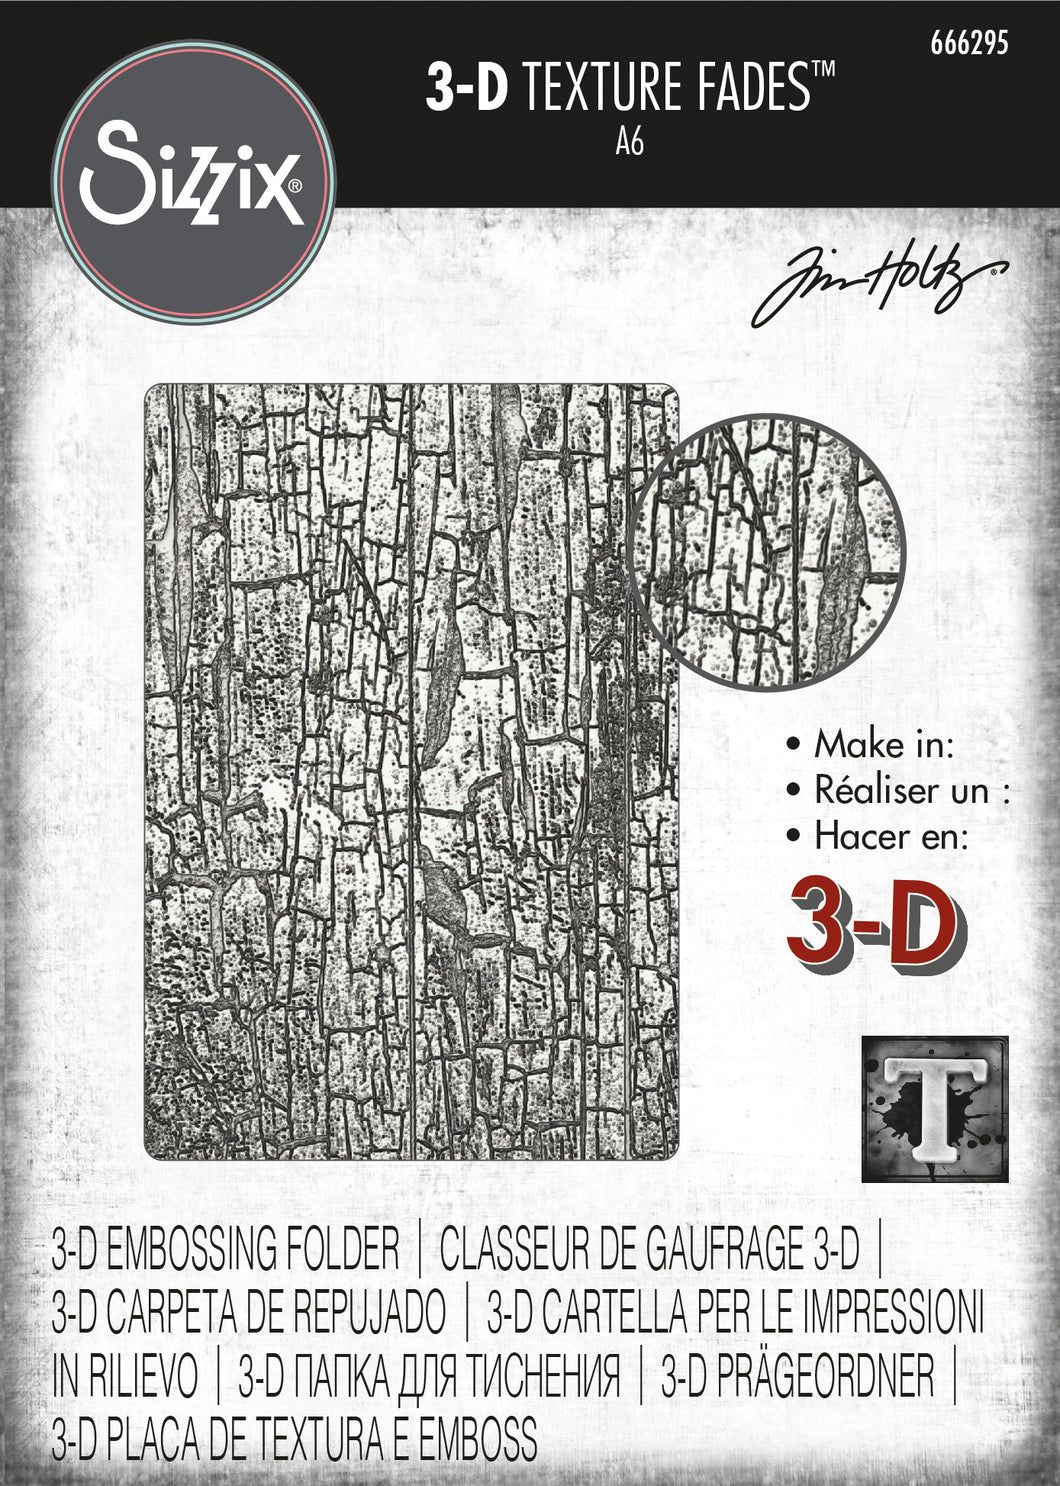 Sizzix 3-D Texture Fades Embossing Folder Cracked by Tim Holtz (666295)